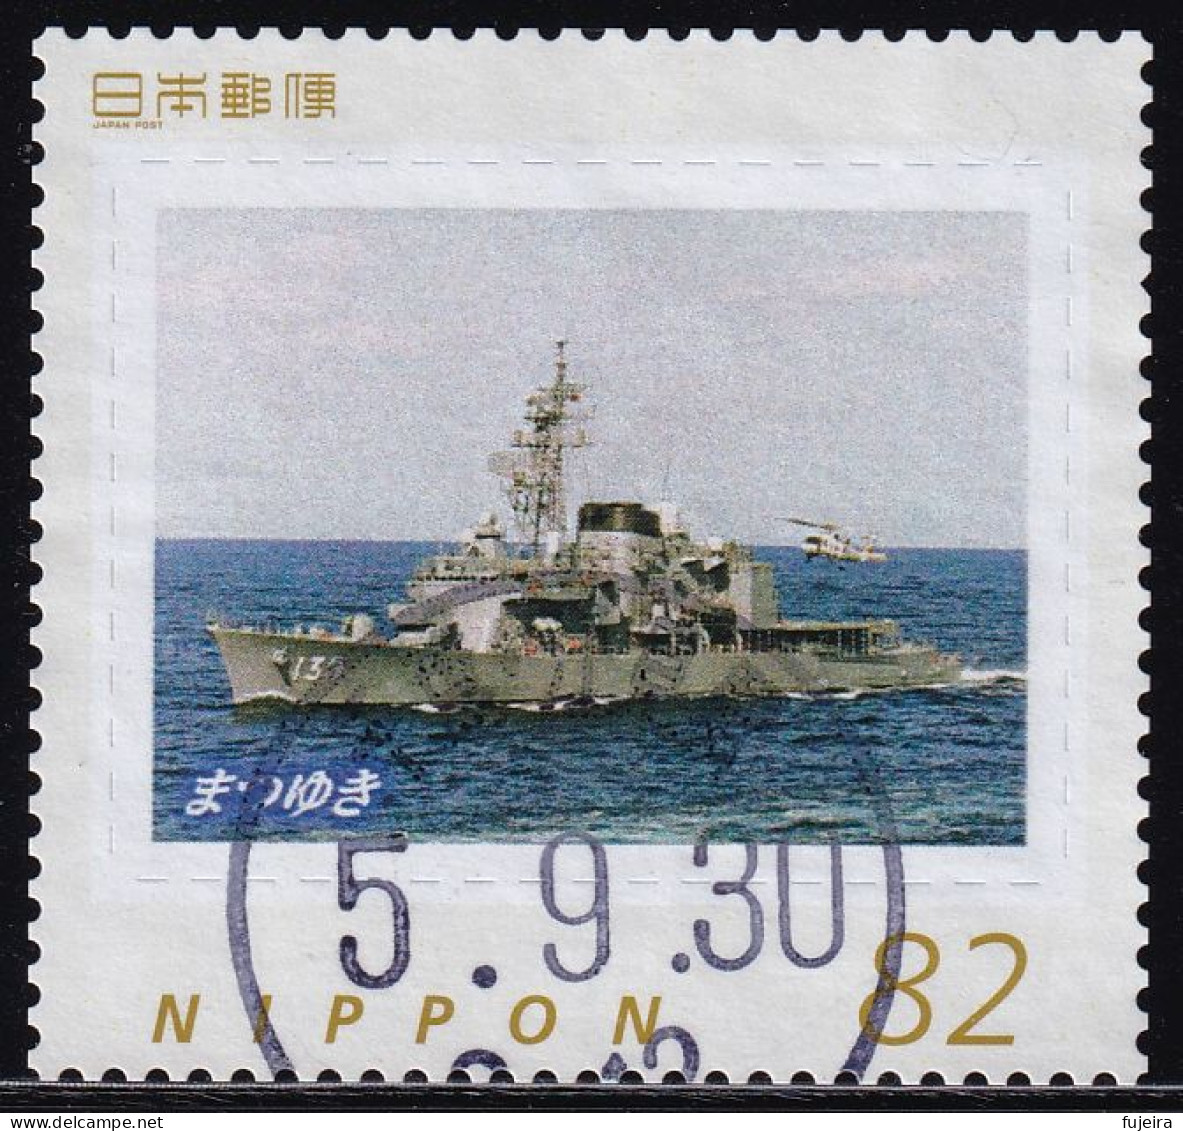 Japan Personalized Stamp, Ship Helicopter (jpv9987) Used - Gebraucht